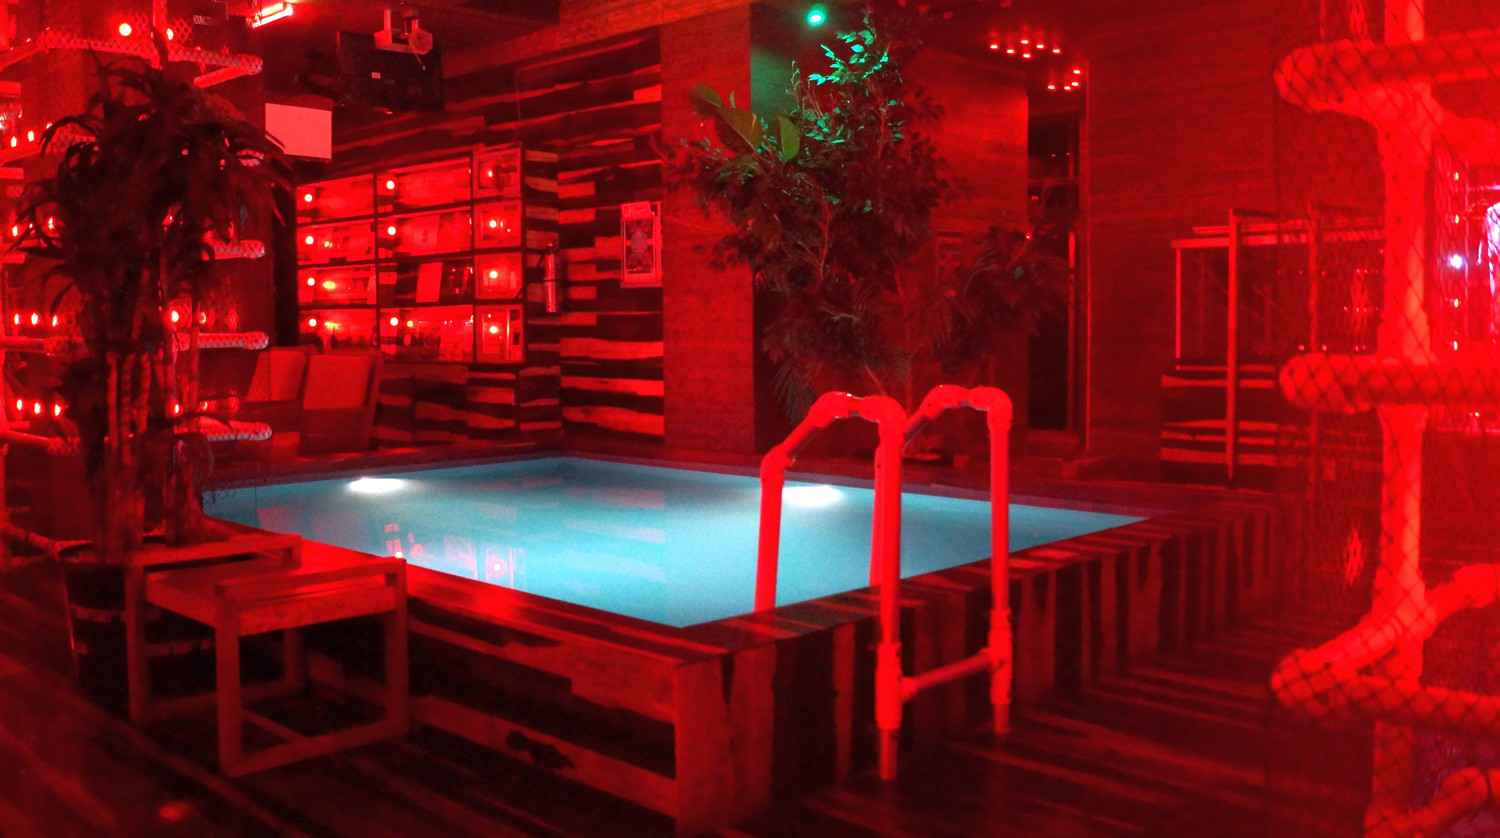 The red room in one of the local Playa Del Carmen bars with a small swimming pool.